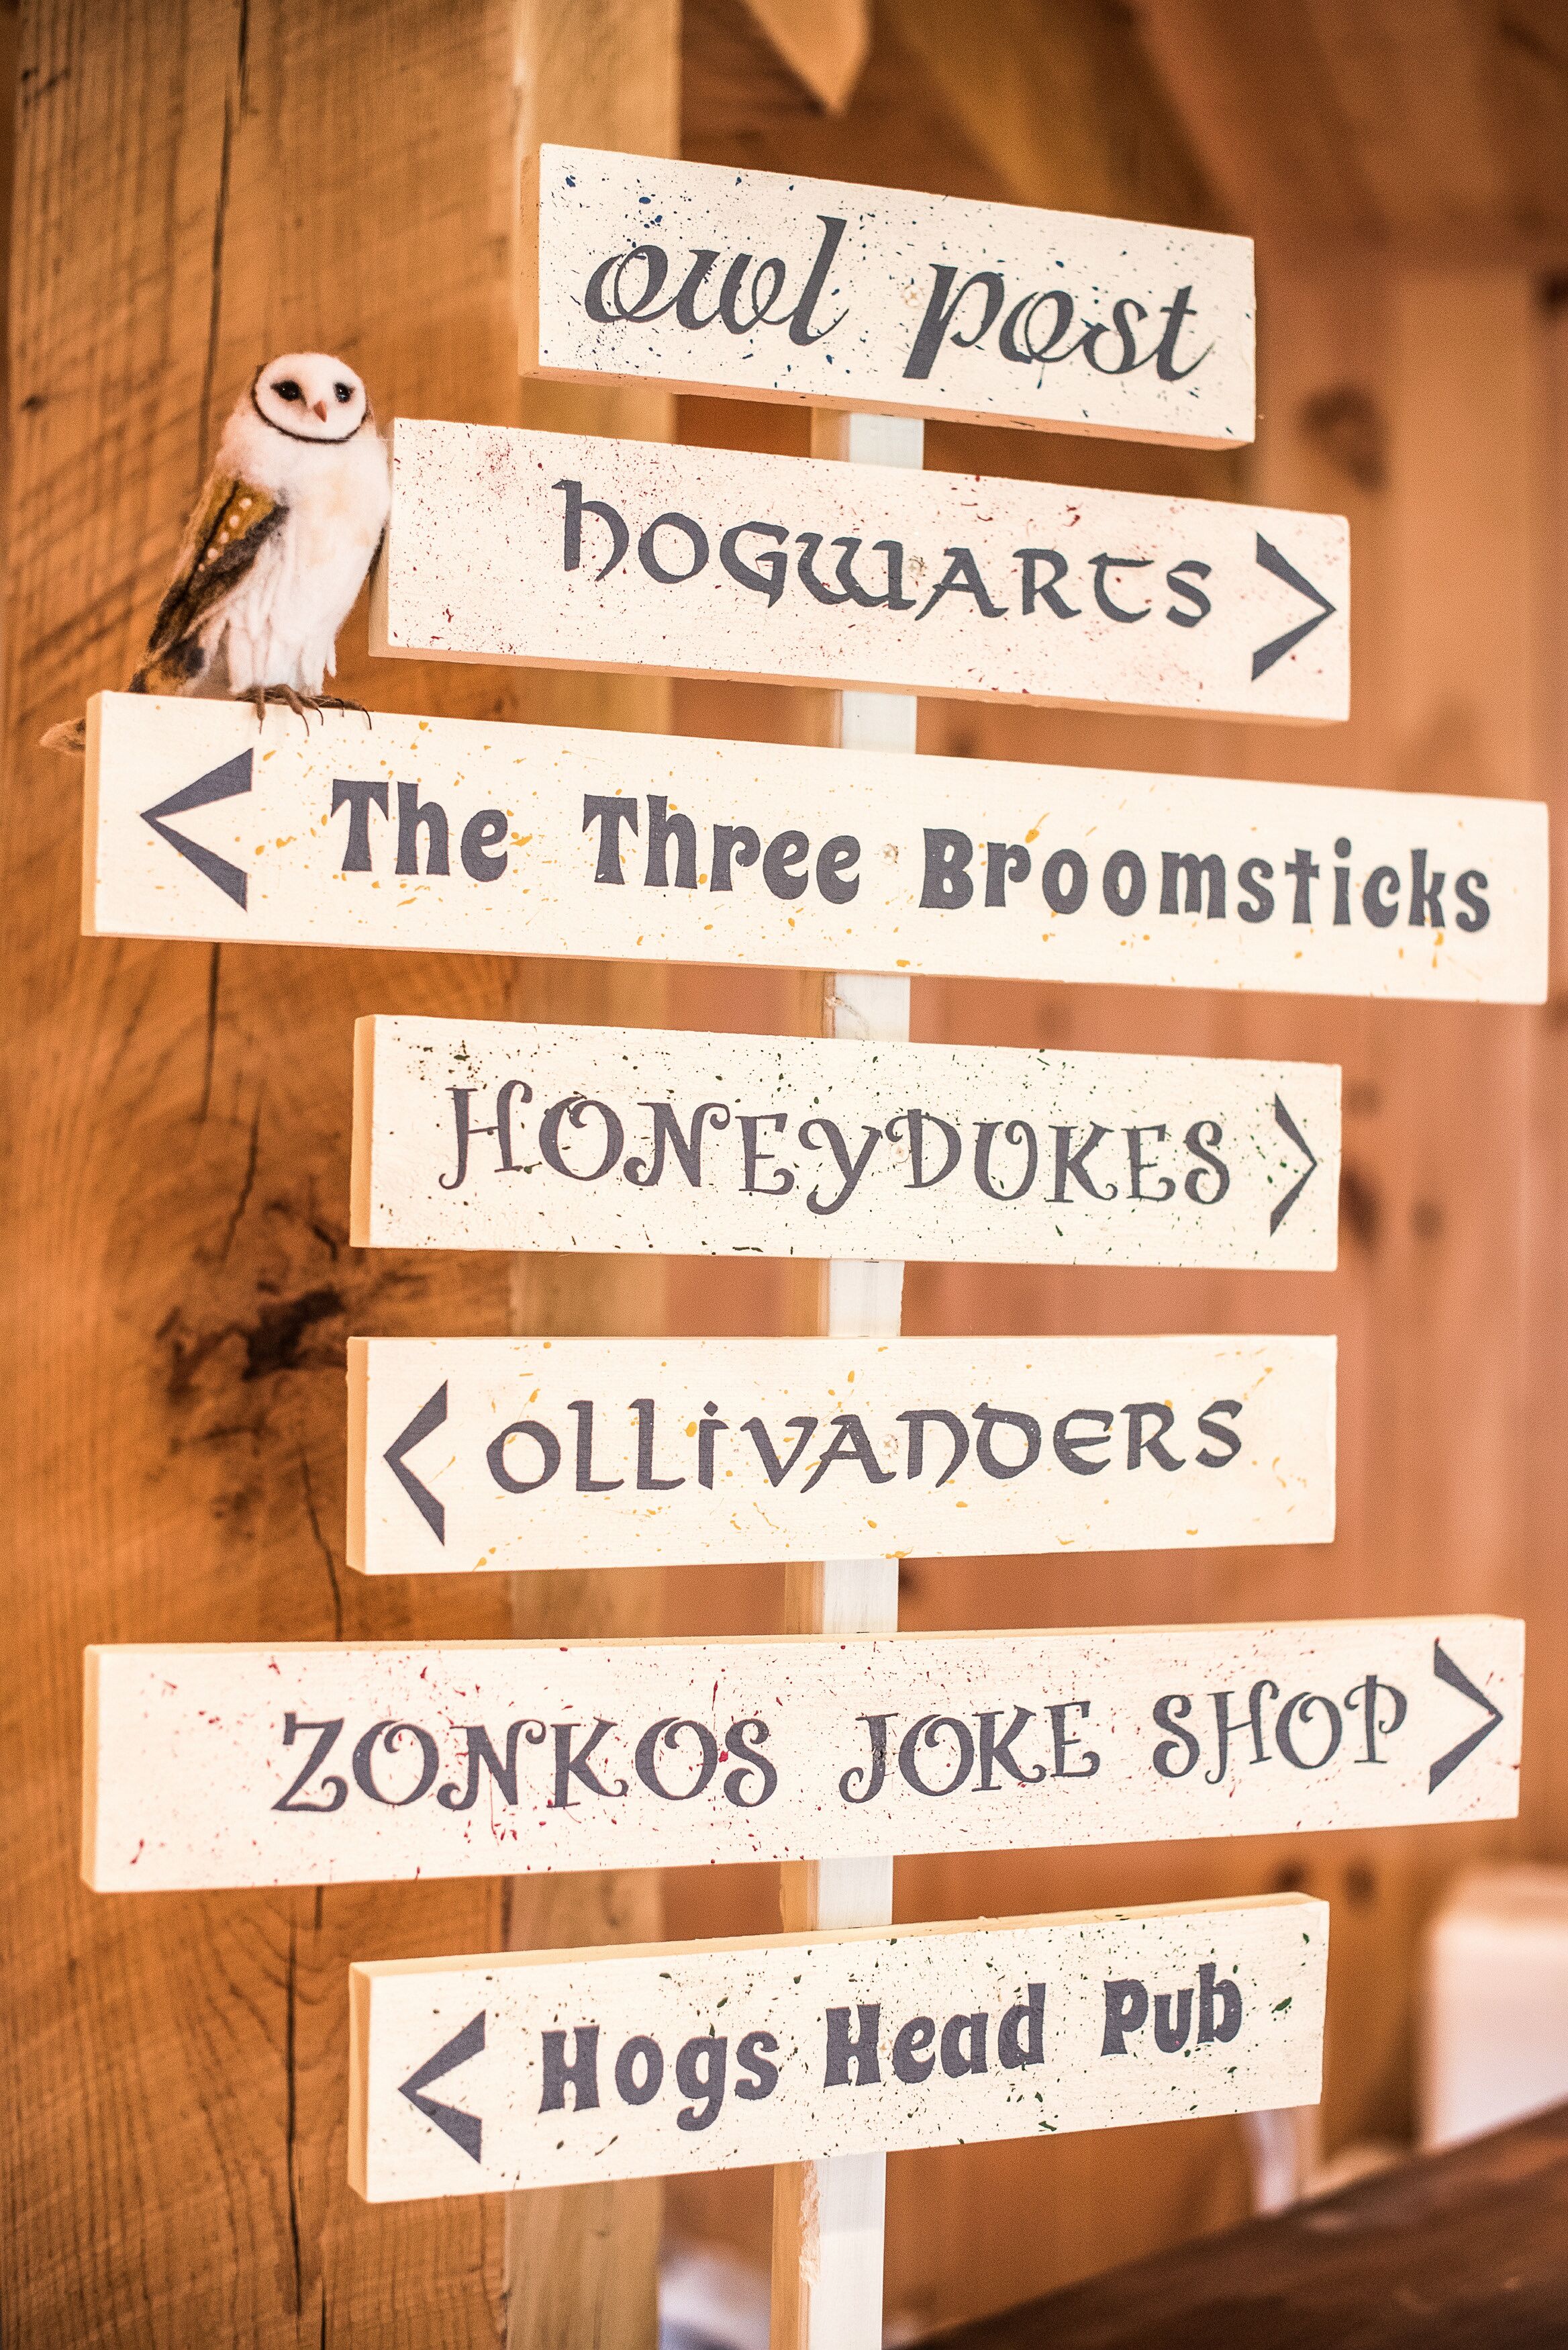 Harry PotterThemed Directional Sign